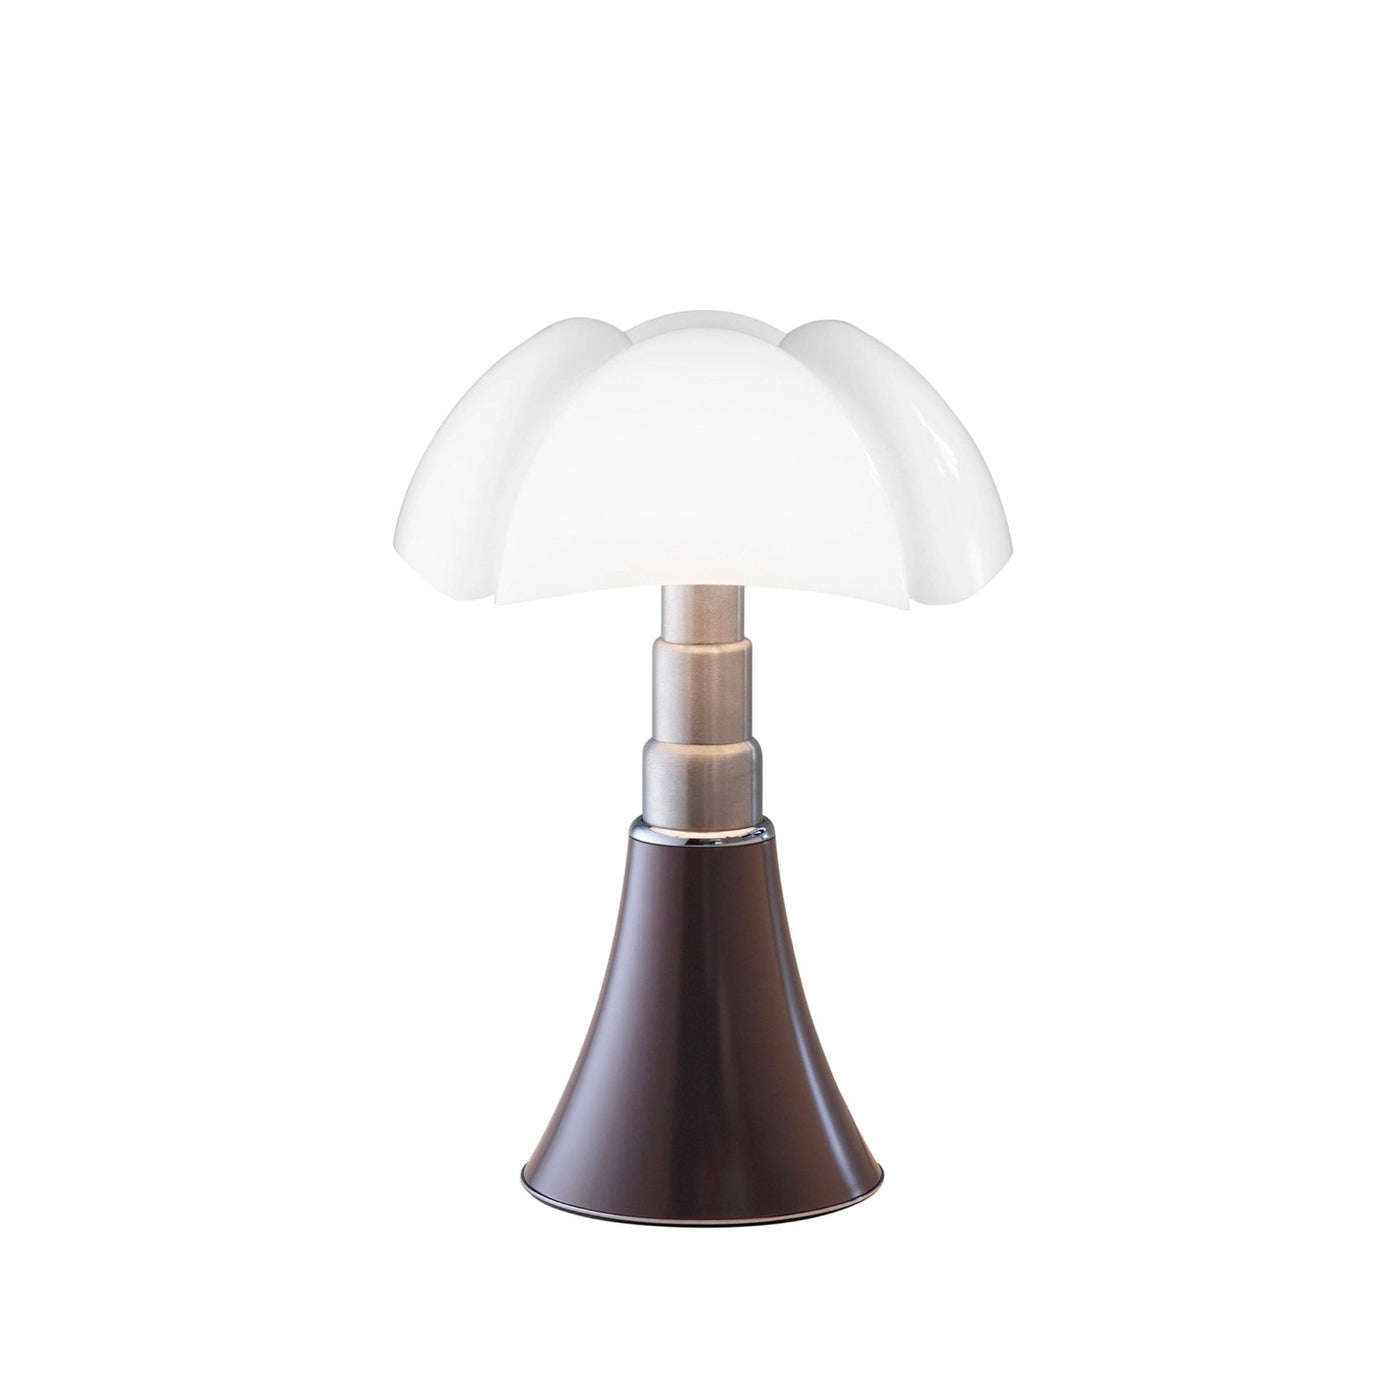 Table and Floor Lamp PIPISTRELLO 66-86 cm by Gae Aulenti 023